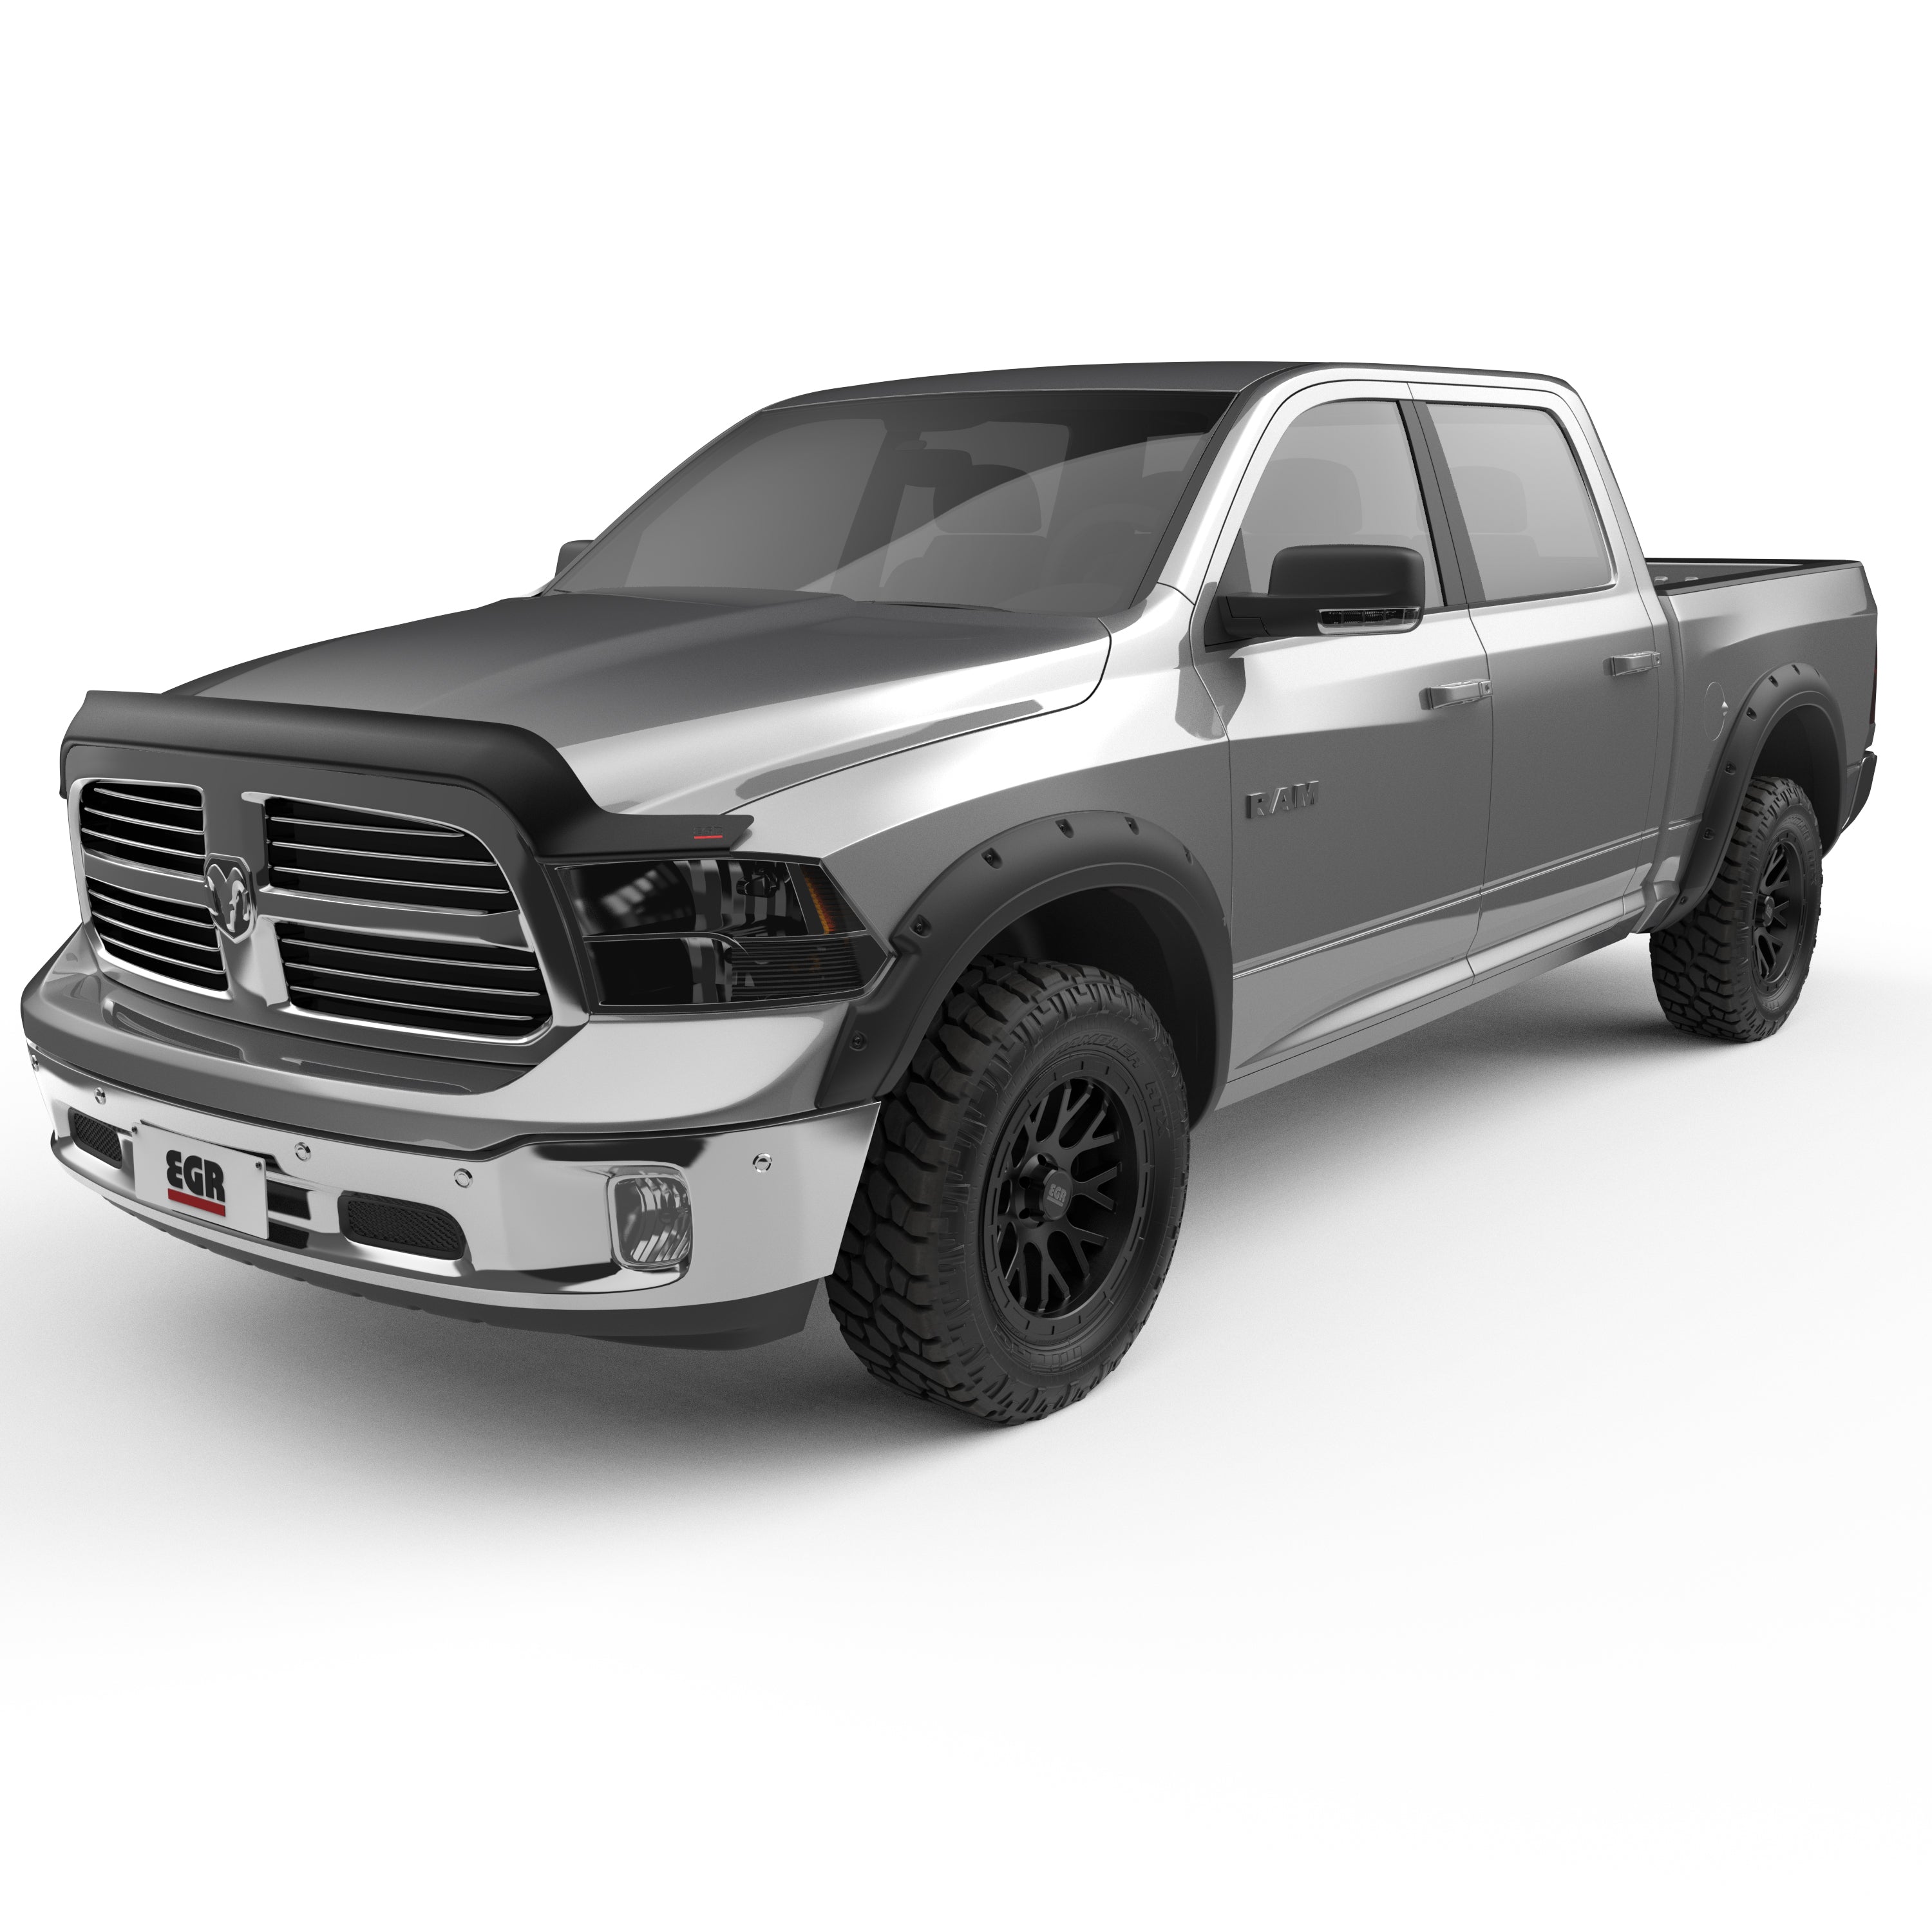 EGR Traditional Bolt-on look Fender Flares with Black-out Bolt Kit 09-18 Ram 1500 19-22 Ram 1500 Classic set of 4